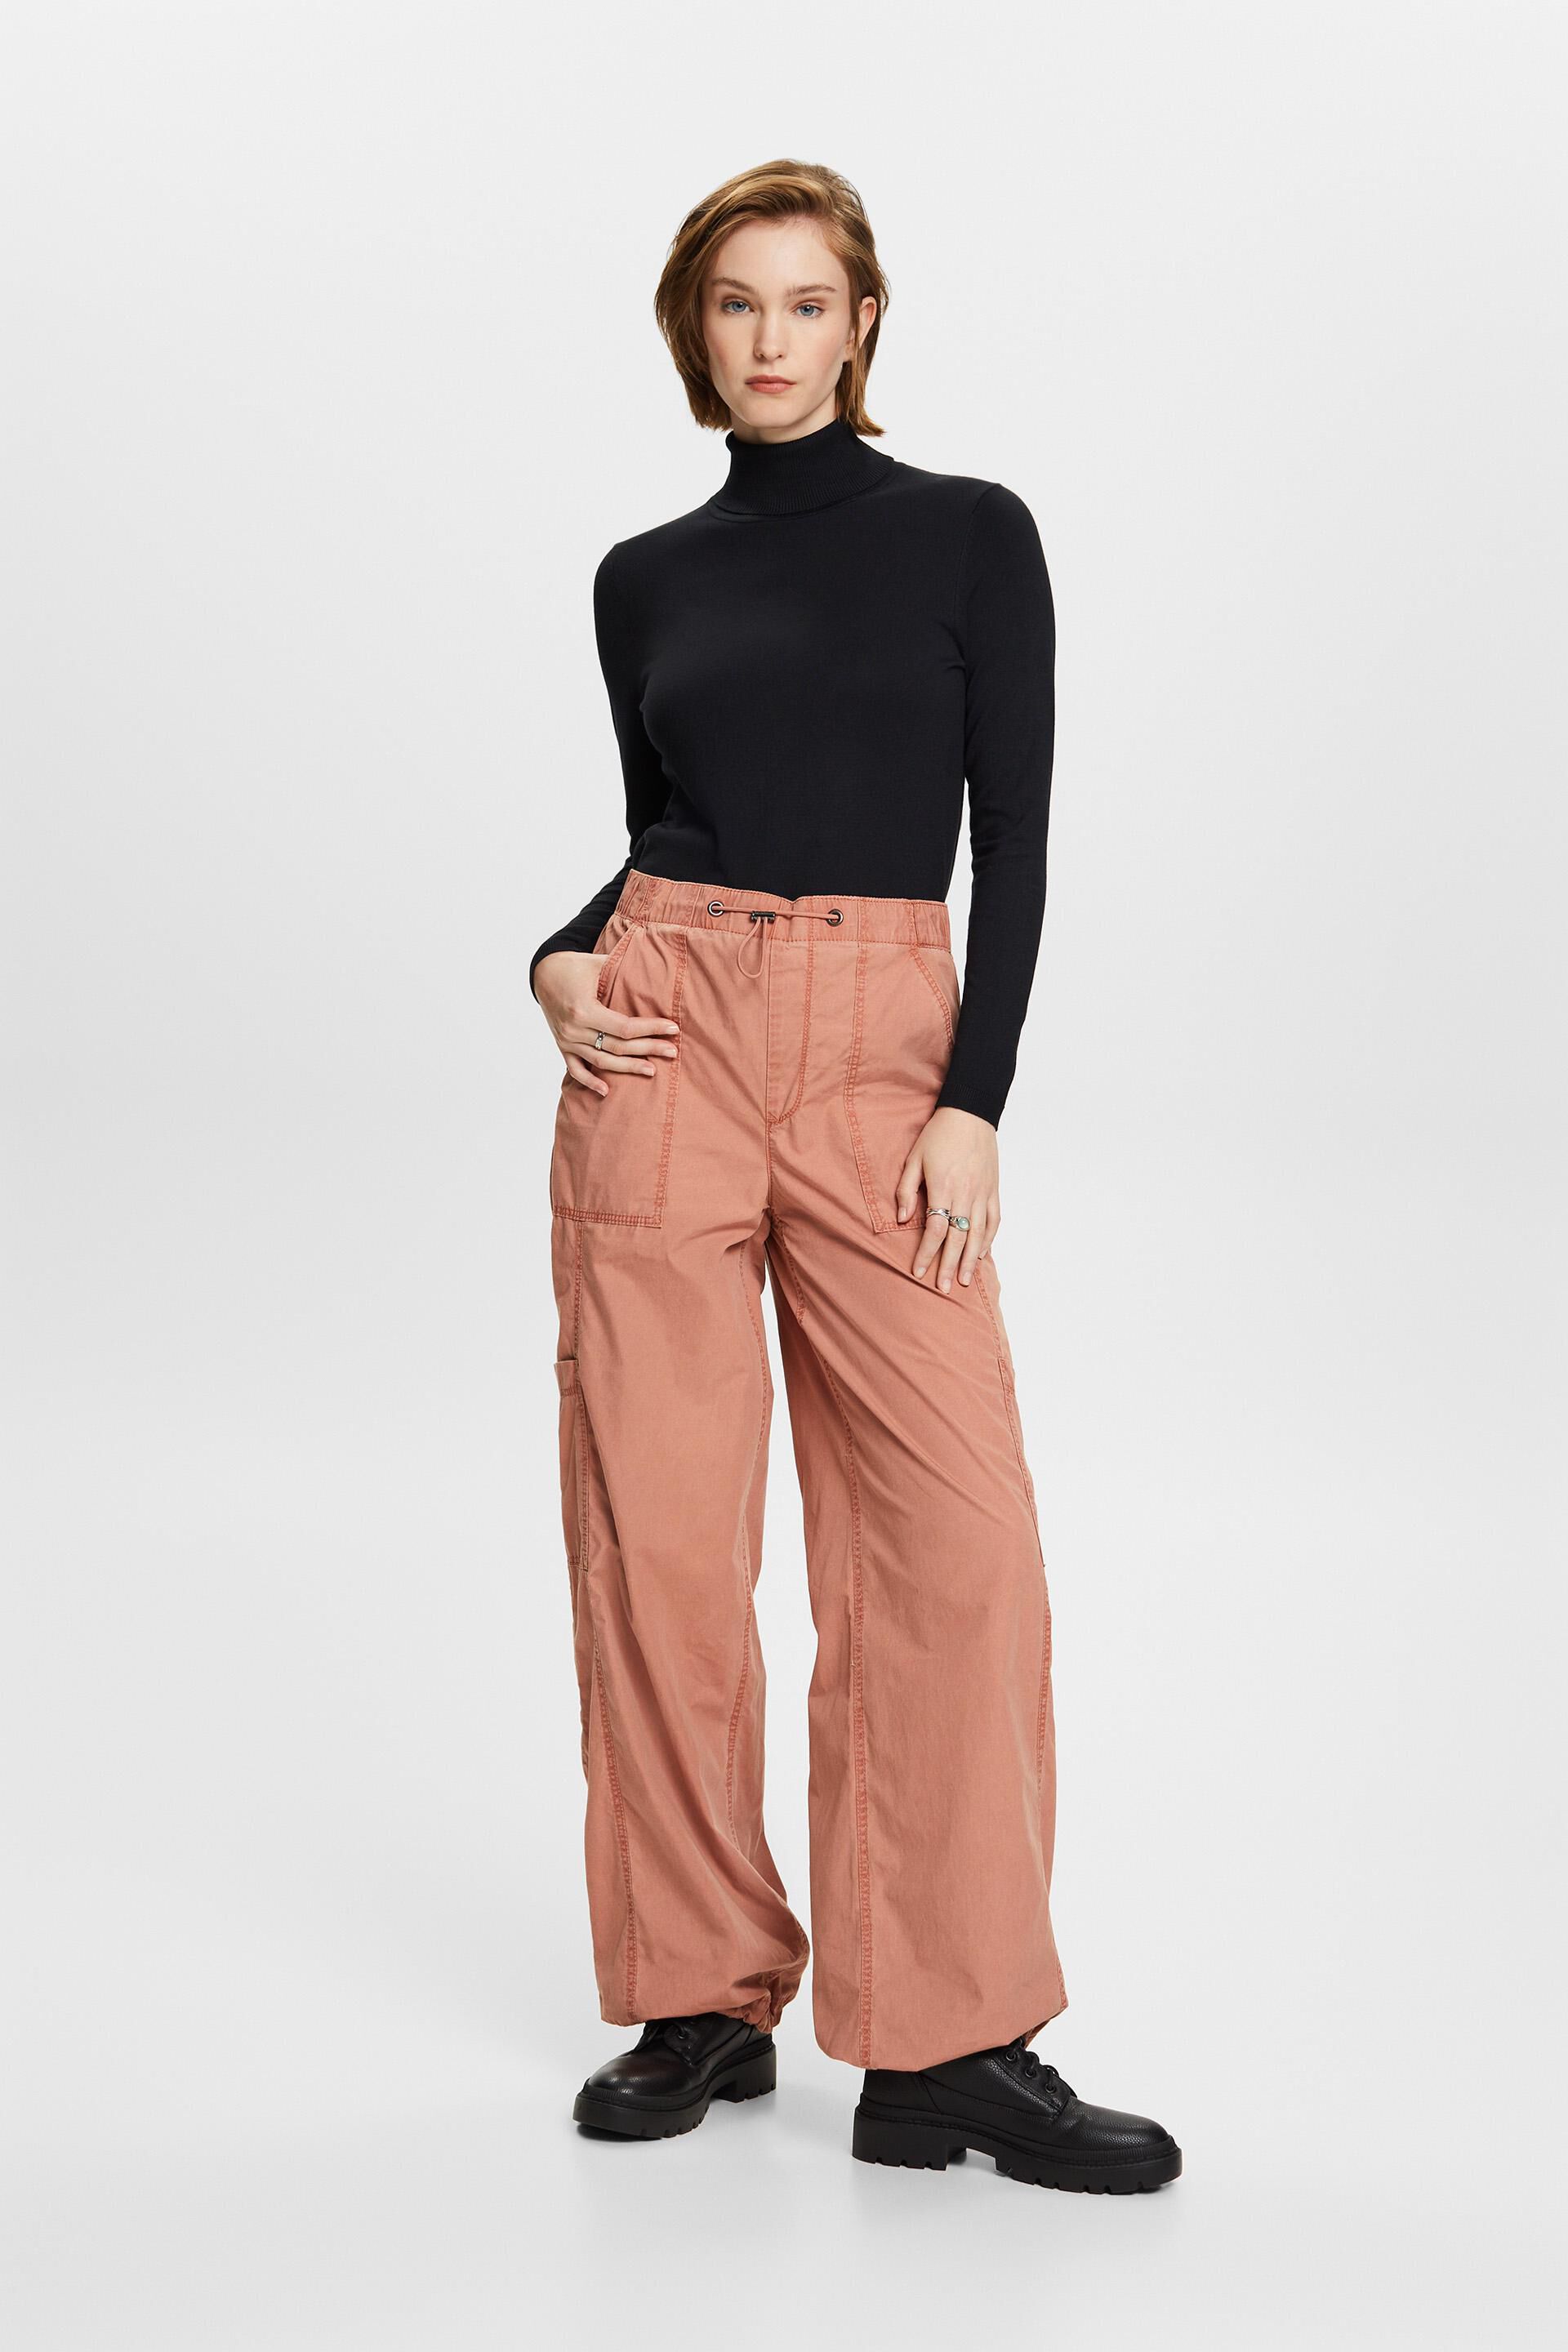 Esprit Pull-on 100% cargo trousers, cotton